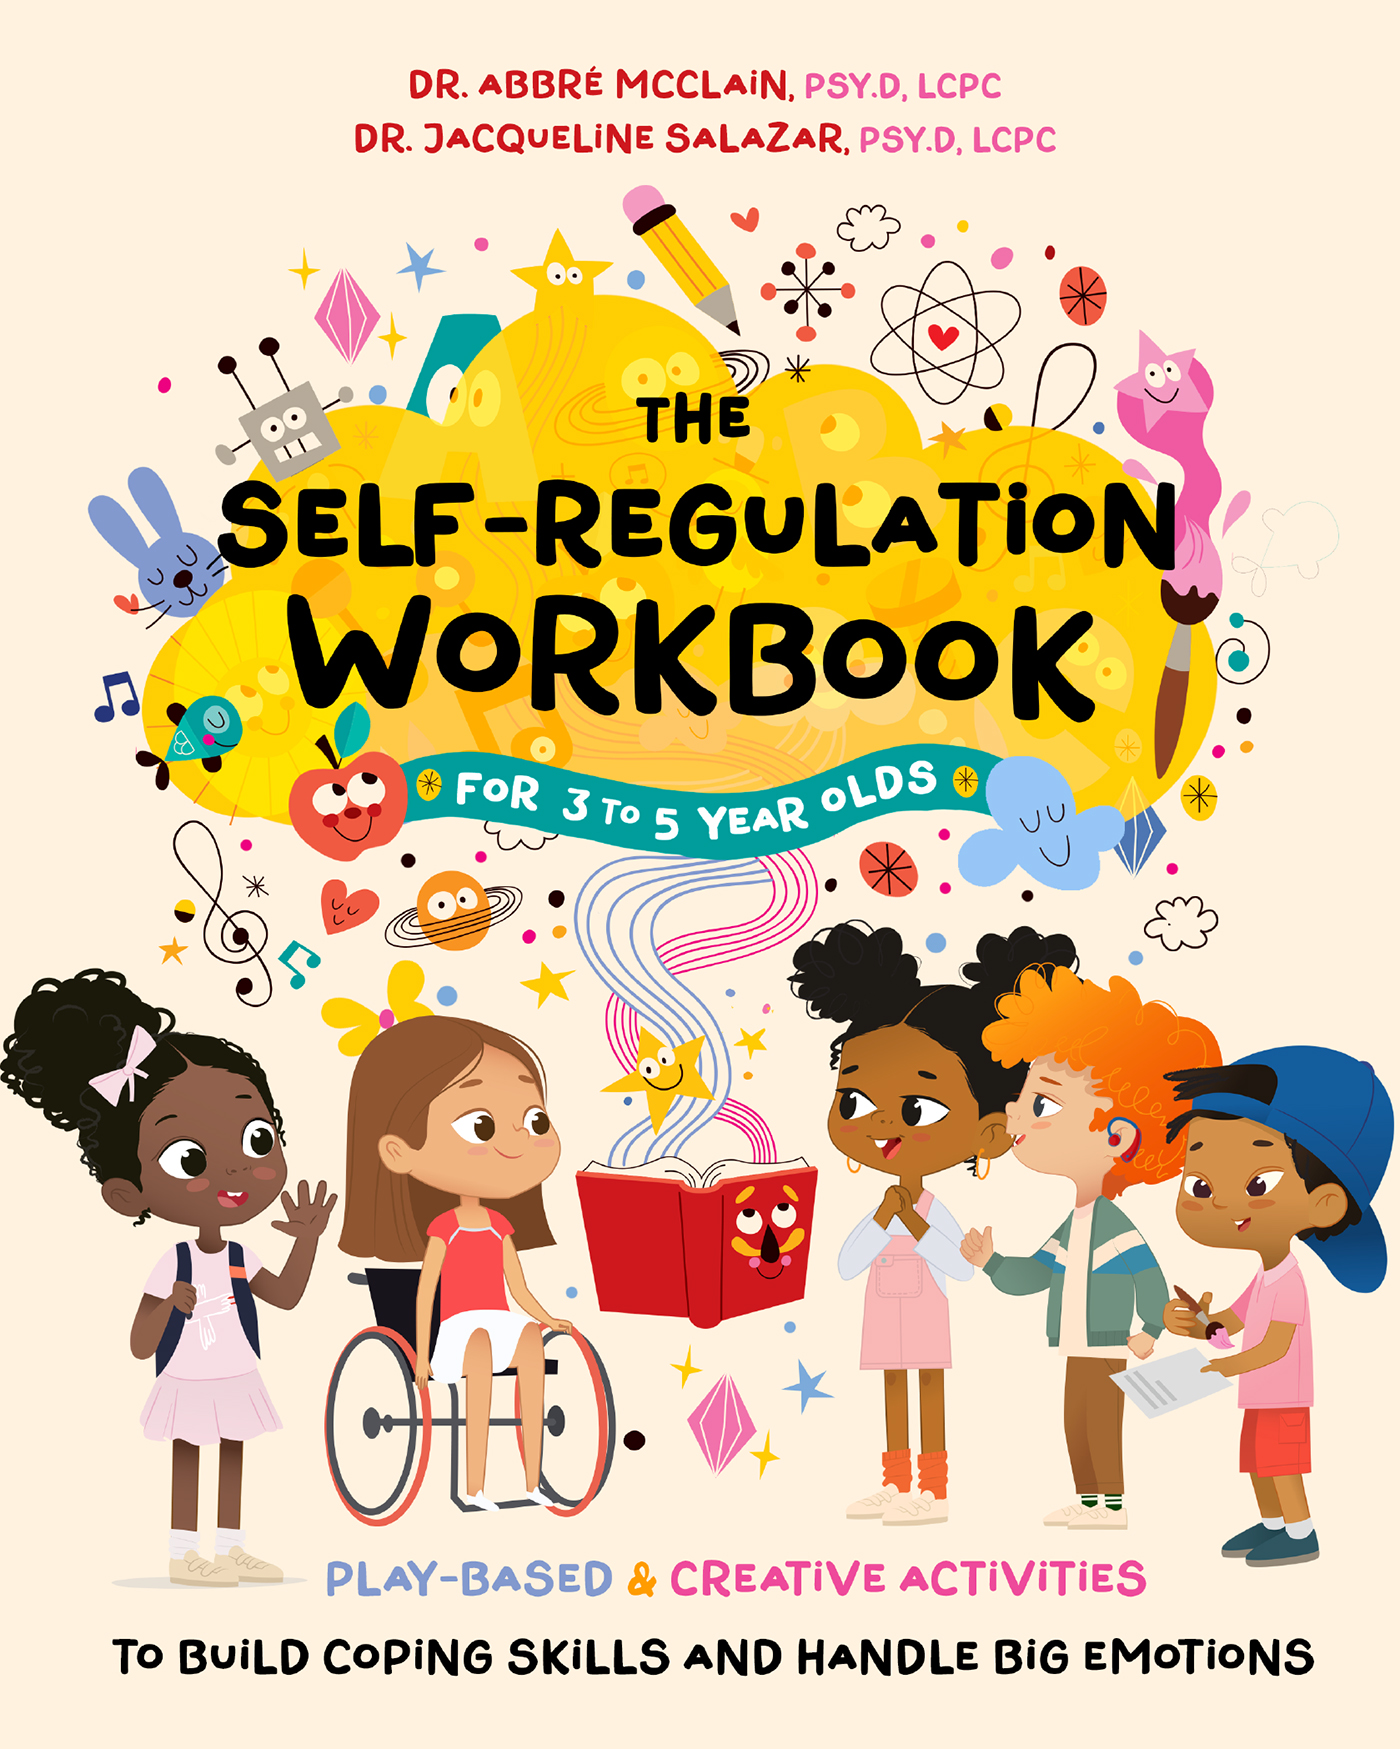 Self-Regulation Workbook for 3 to 5 Year Olds